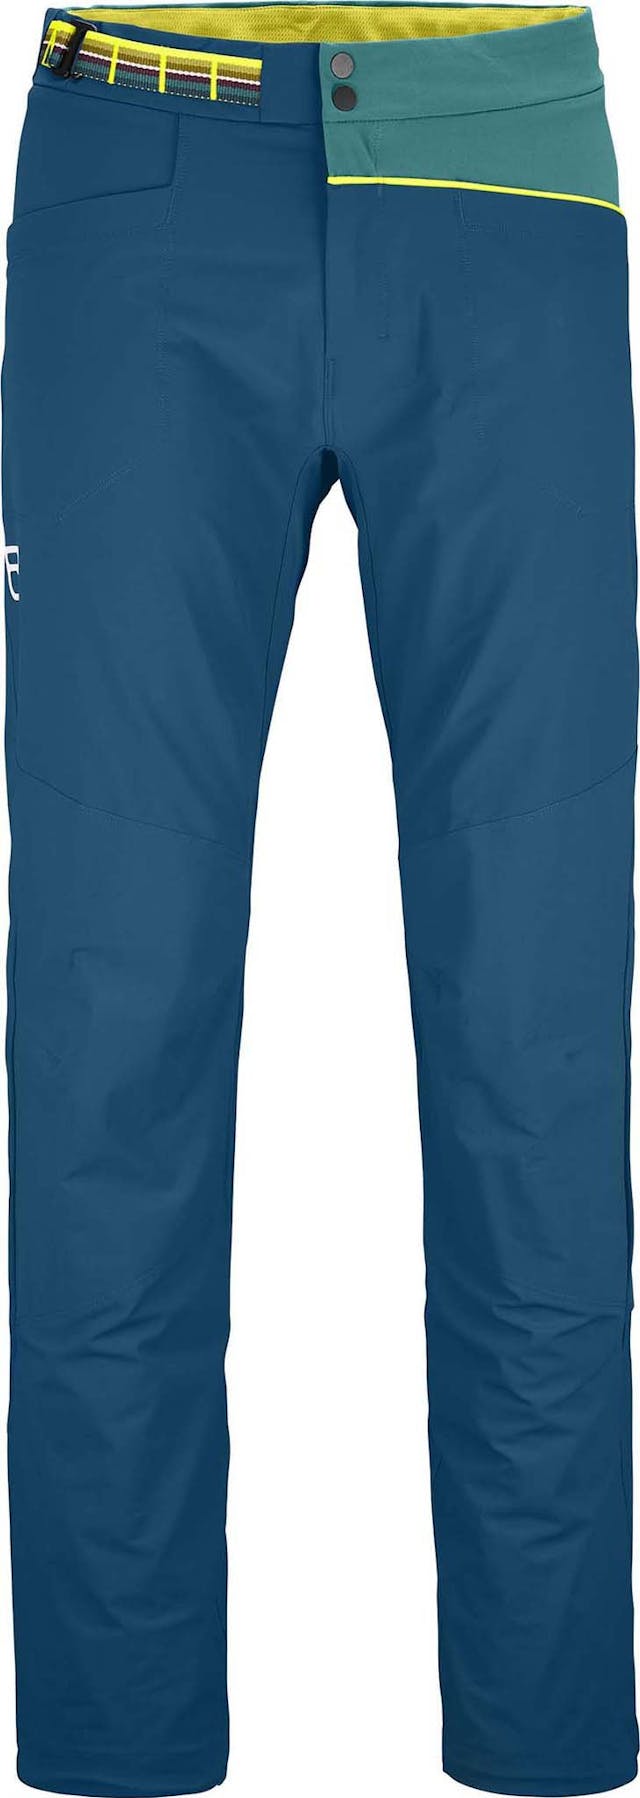 Product image for Pala Pants - Men's